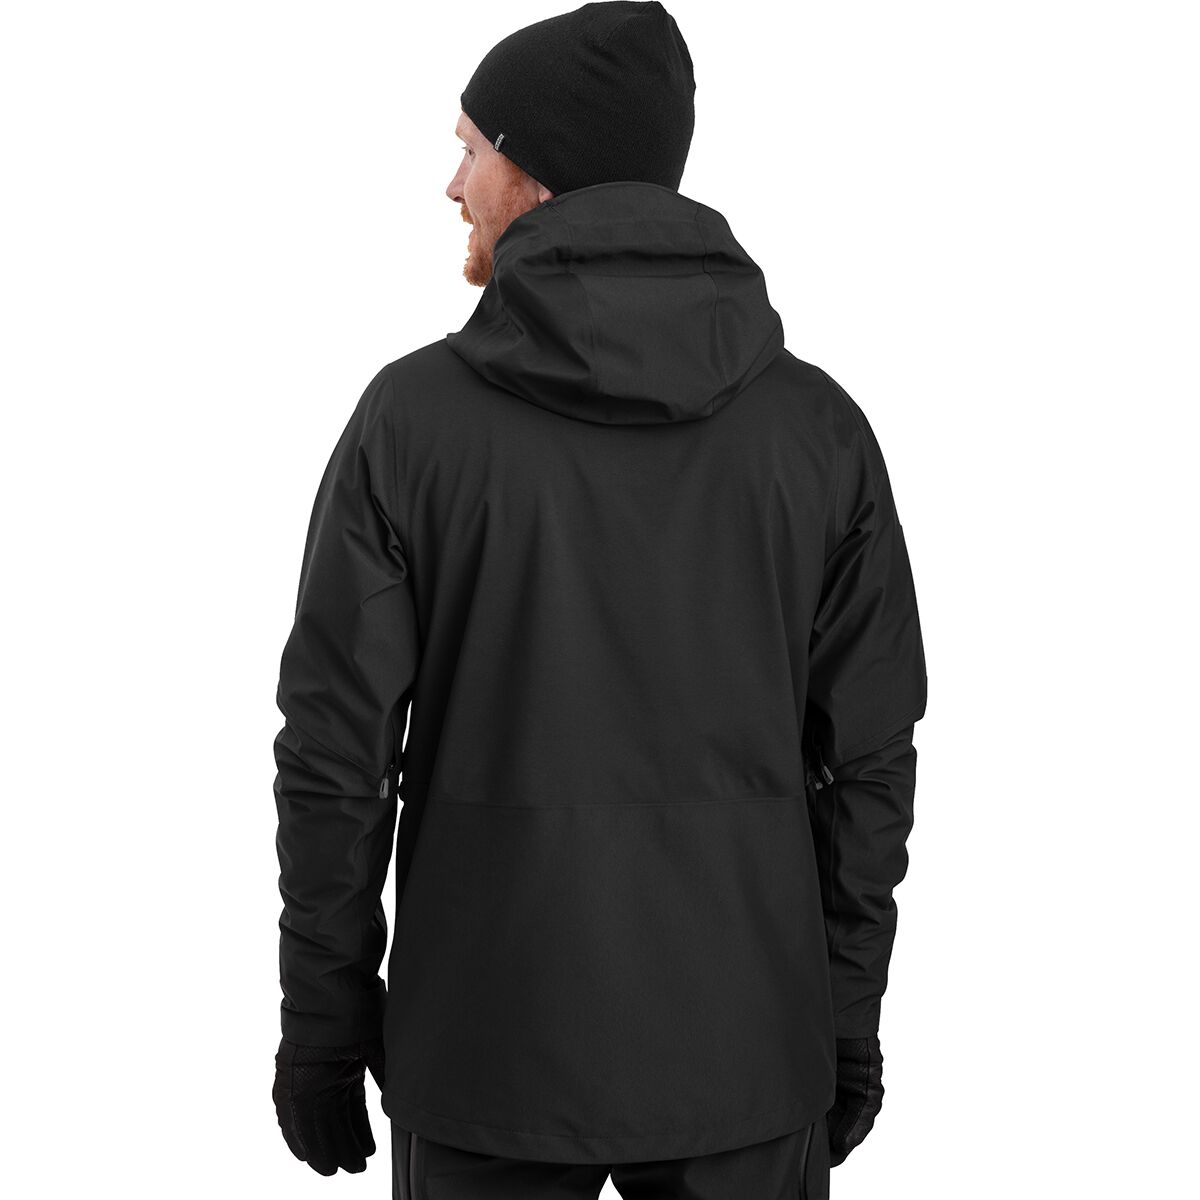 Outdoor Research Skytour AscentShell Jacket - Men's - Clothing